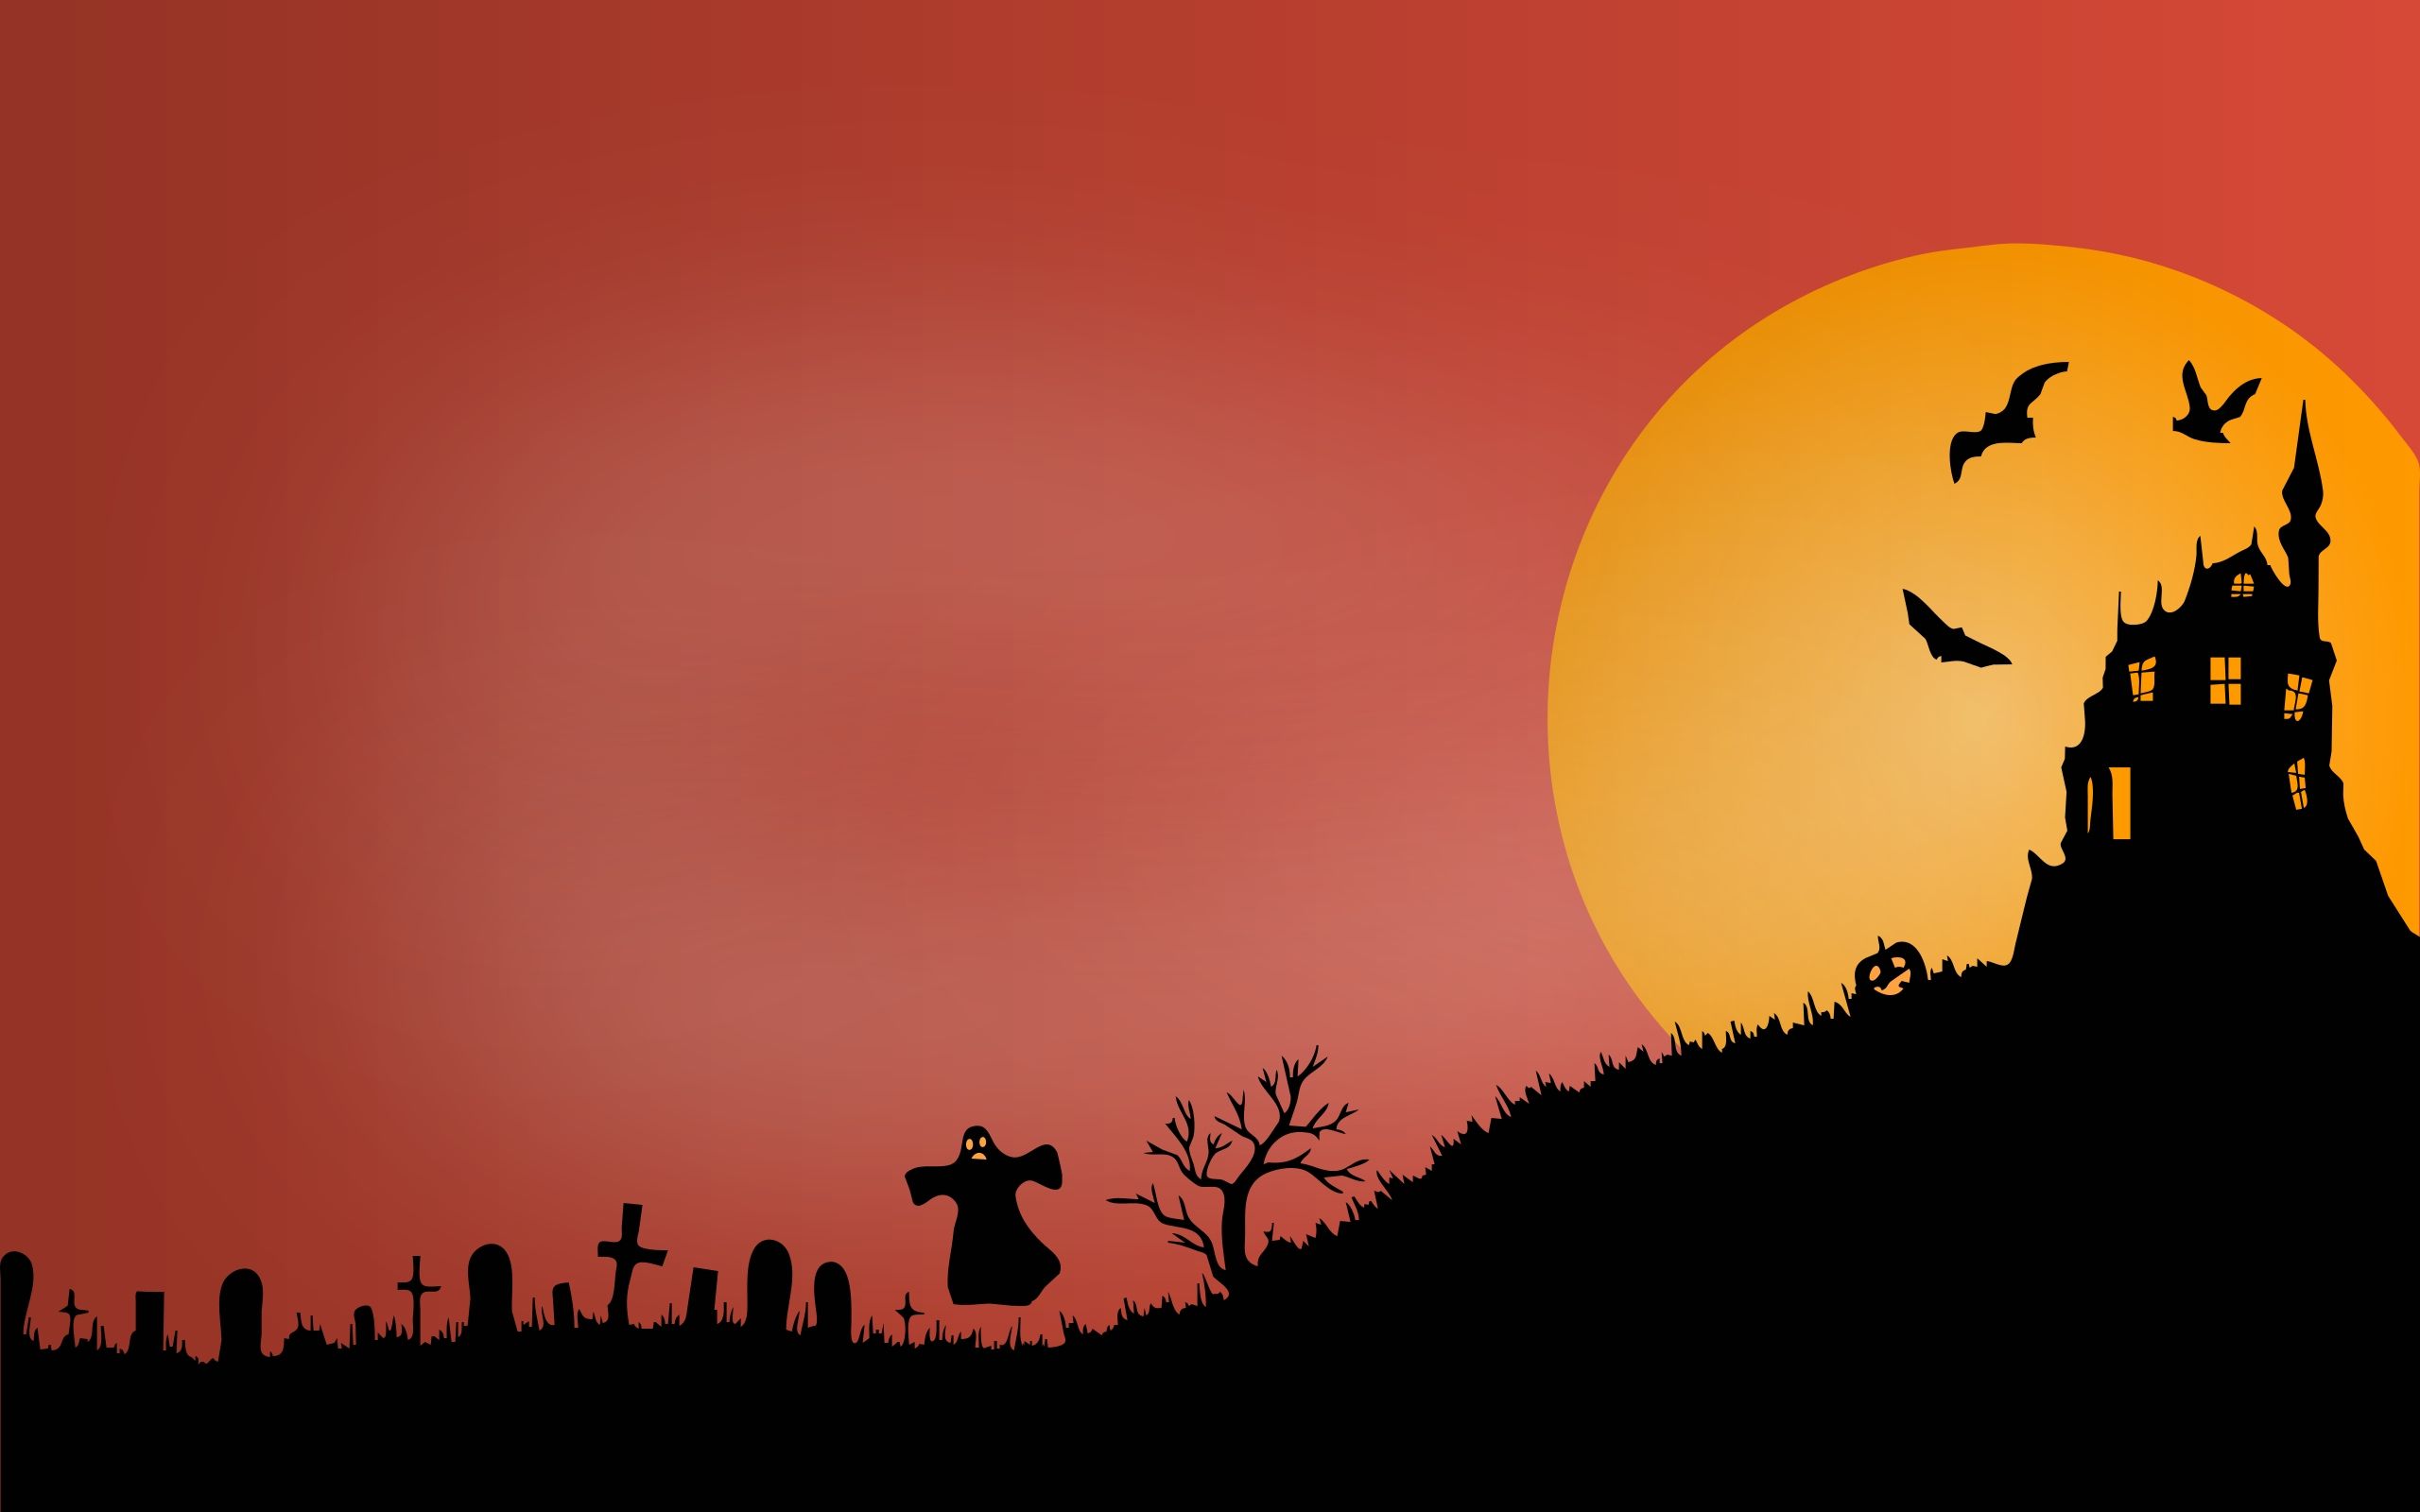 Halloween 4K wallpaper for your desktop or mobile screen free and easy to download